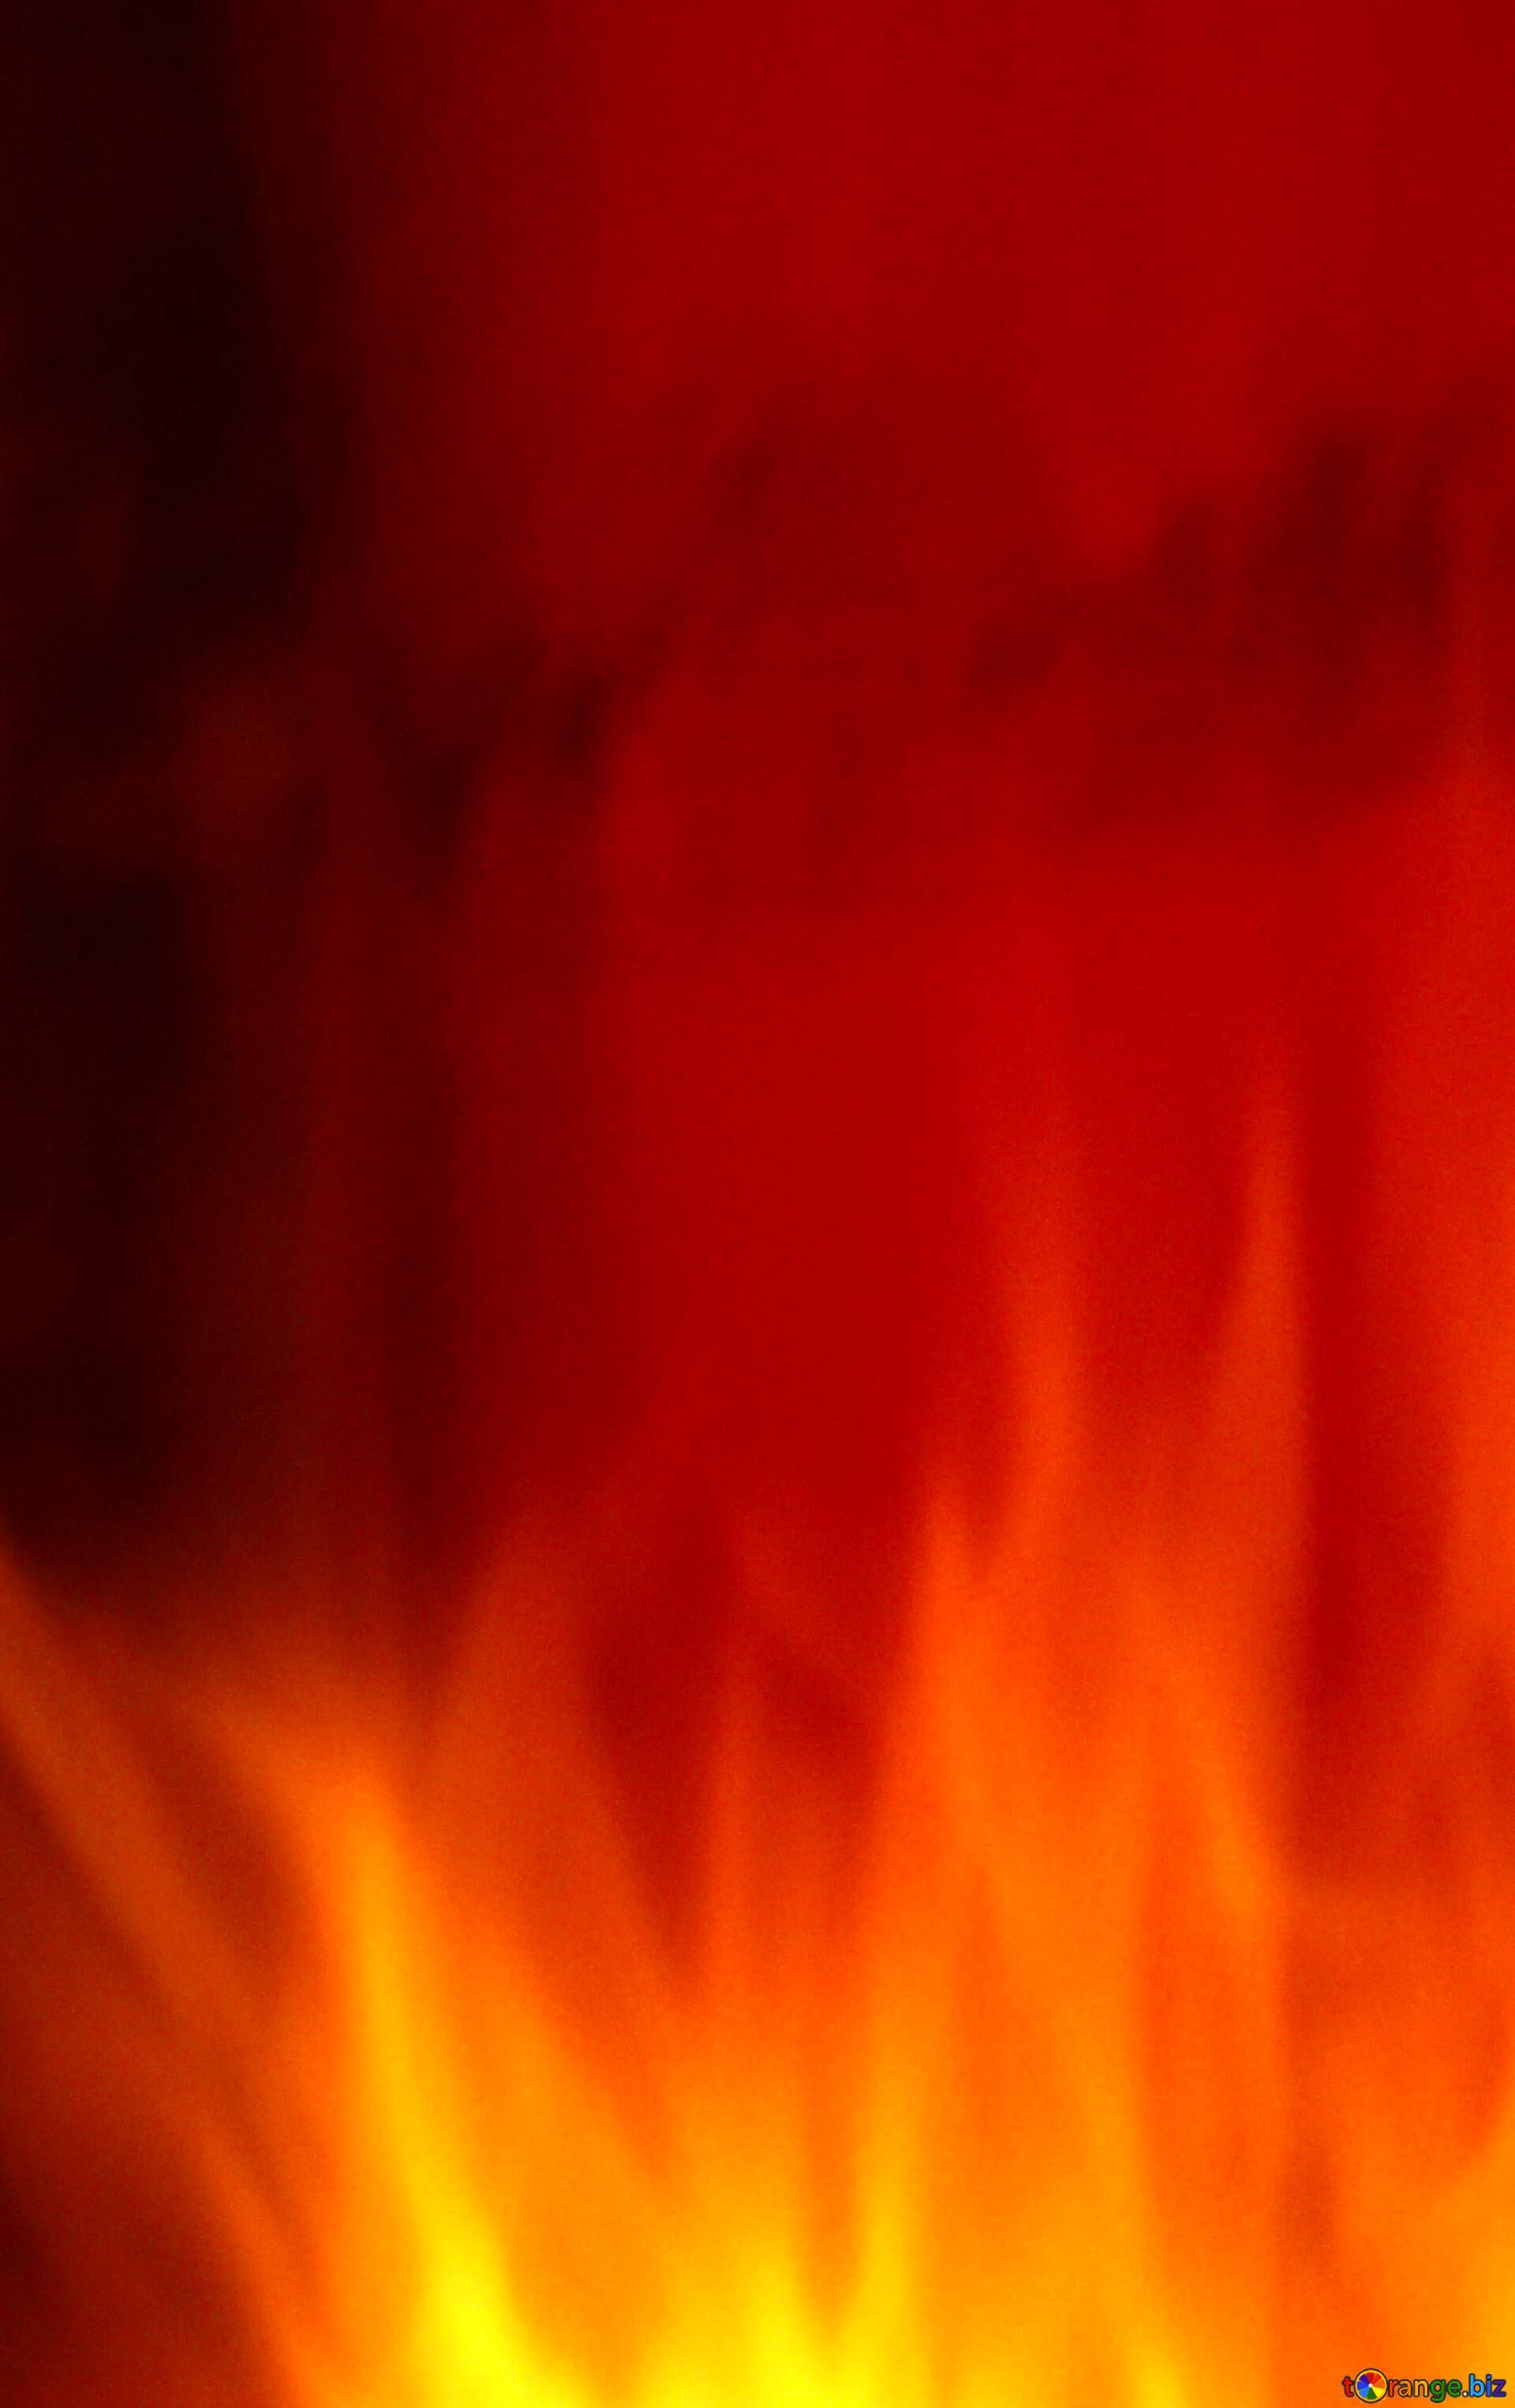 Download free picture For SALE red fire banner background on CC-BY License  ~ Free Image Stock  ~ fx №73506